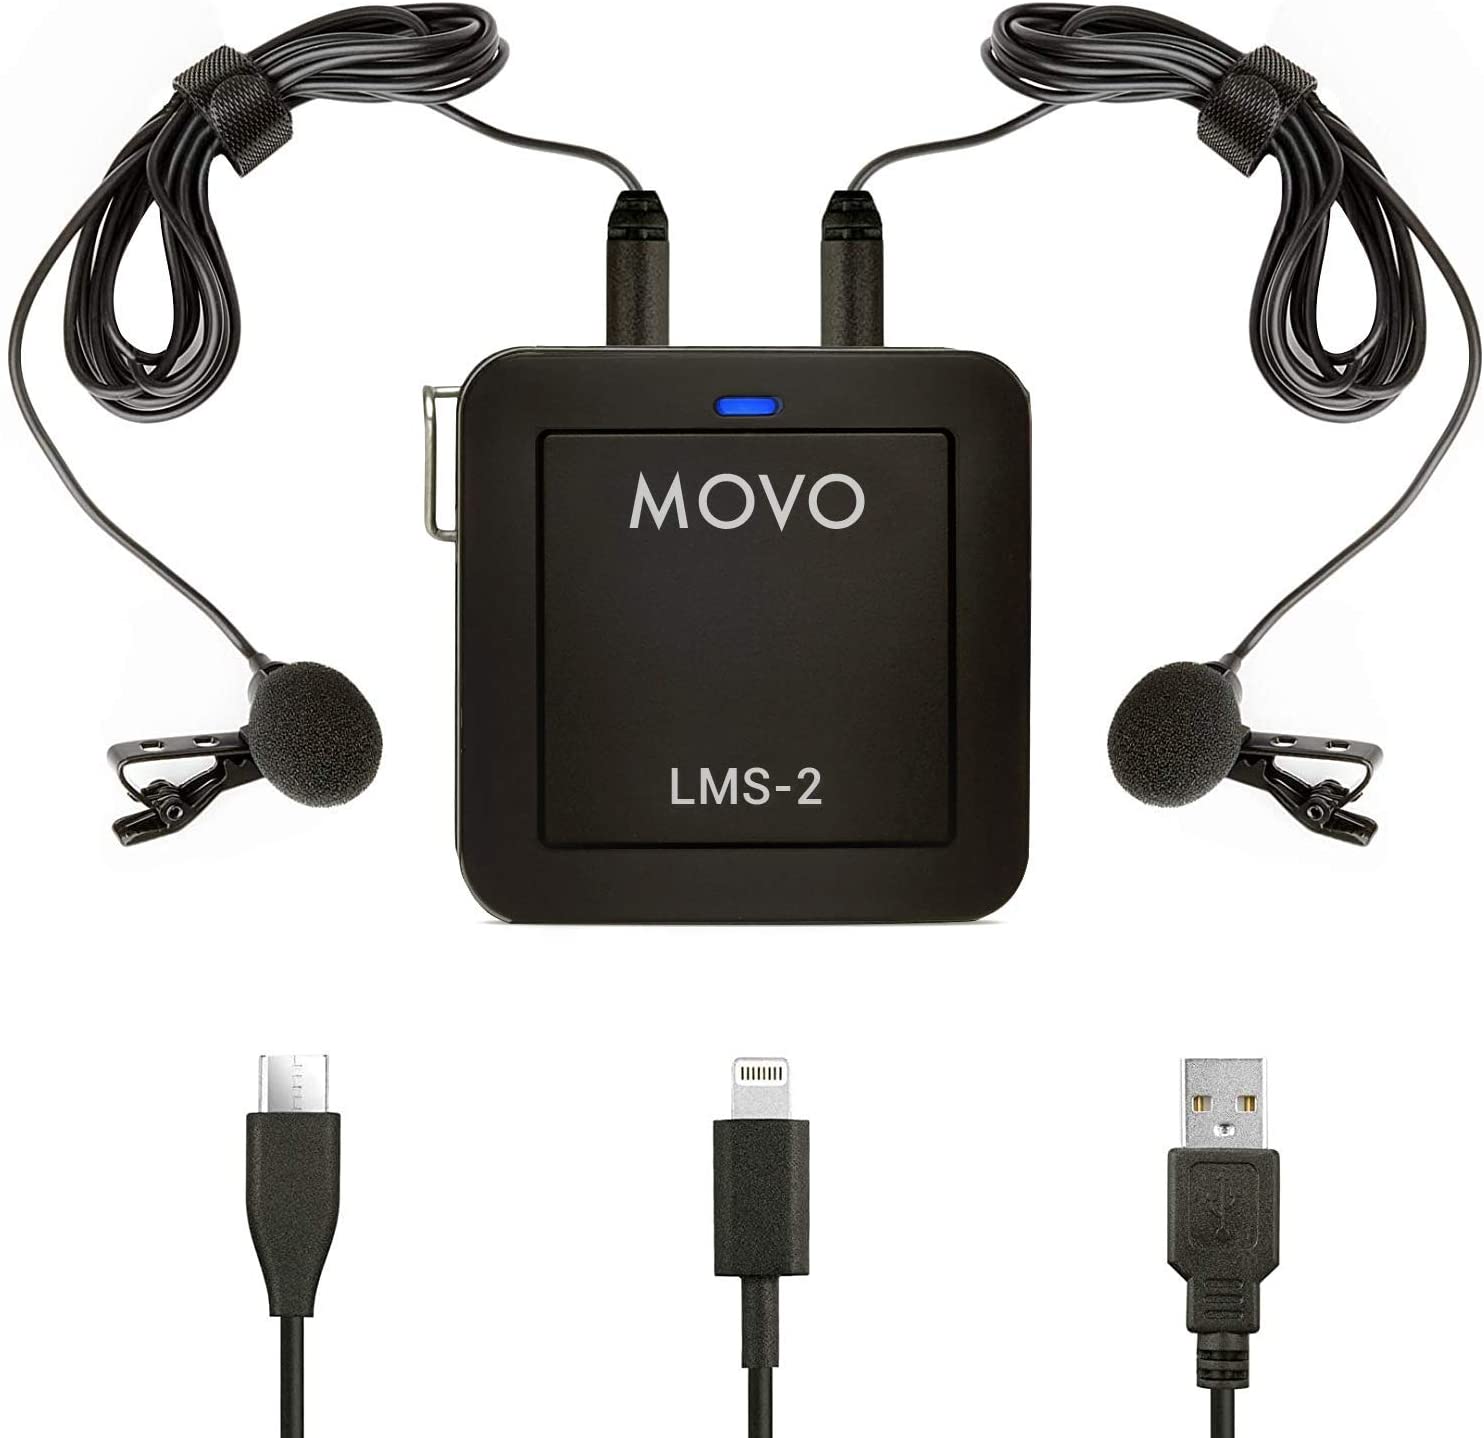 Movo PC-M6 Universal Cardioid Podcasting Microphone with XLR, 3.5mm and USB Outputs, Shockmount and Pop Filter